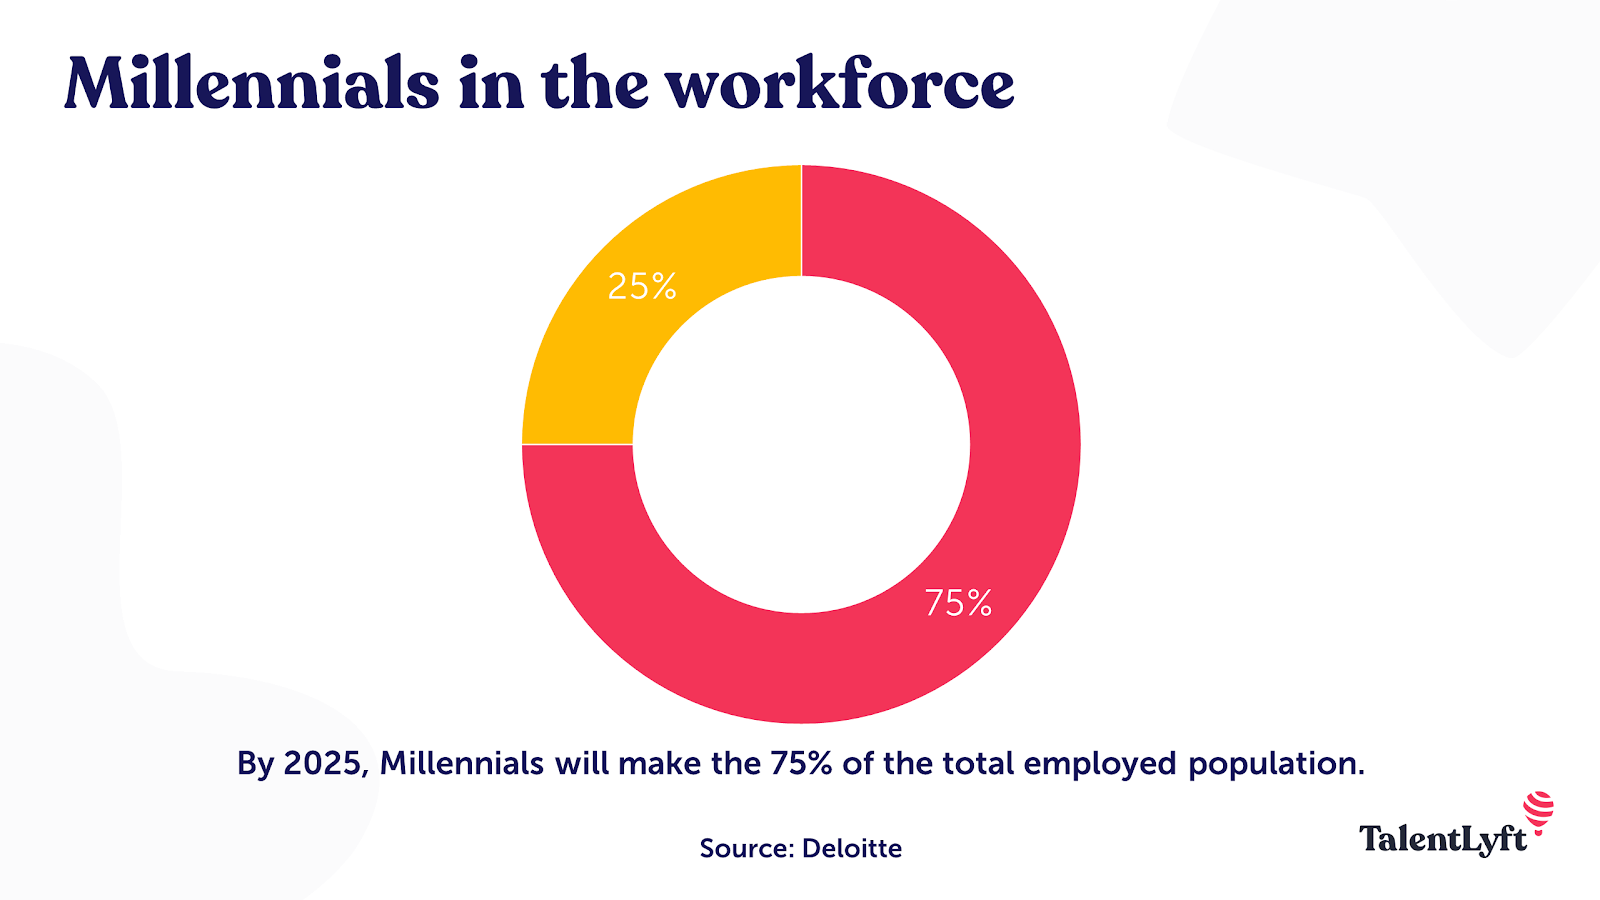 Millennials in the workplace statistic